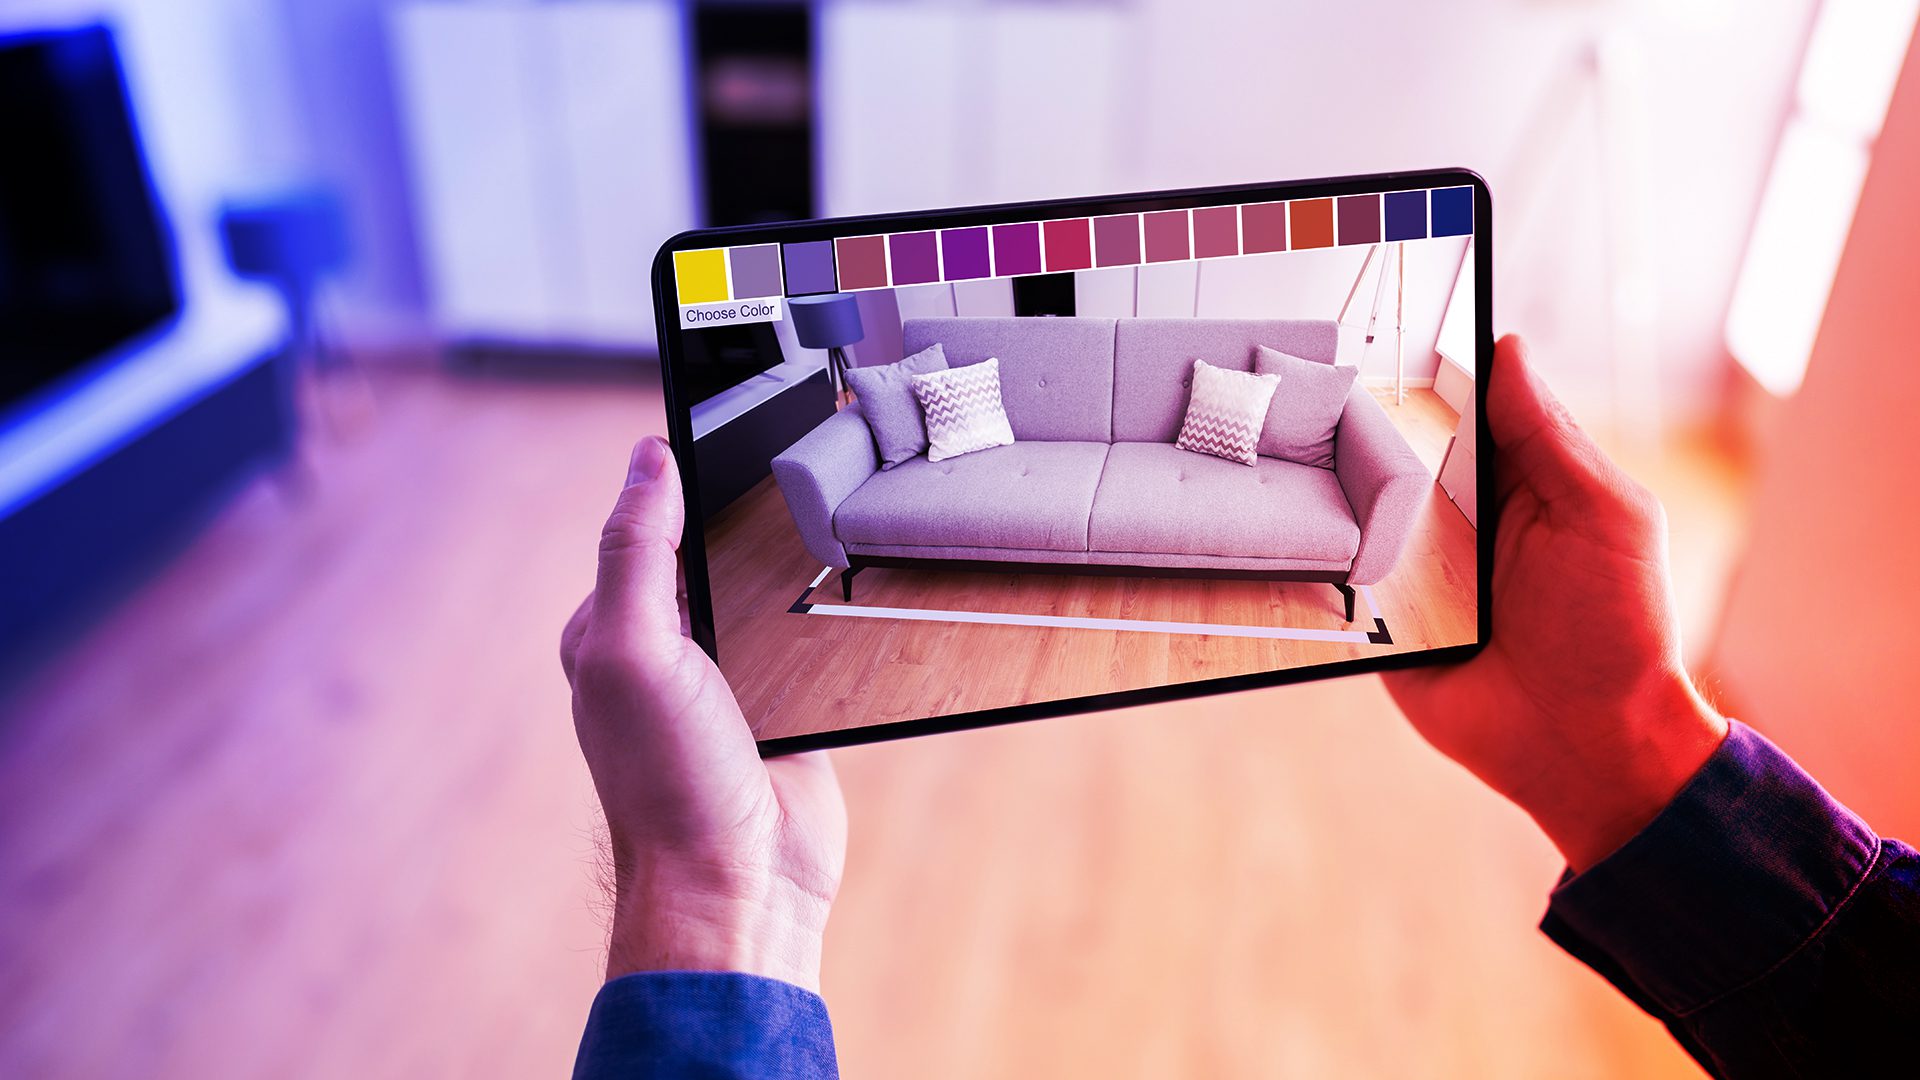 Applications of Augmented Reality in Marketing and Advertising